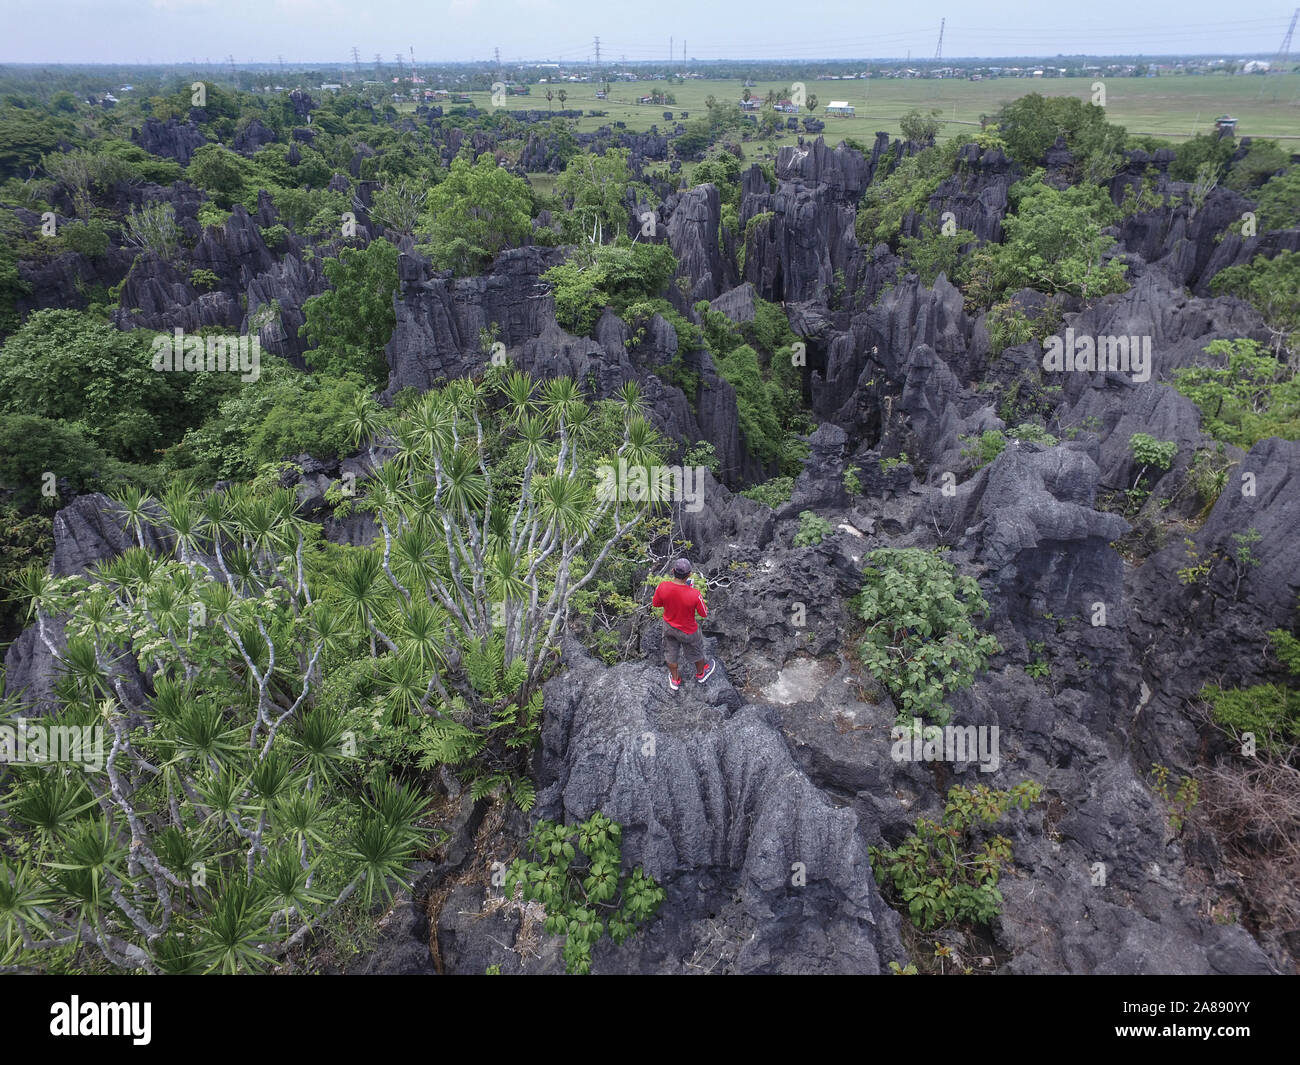 Man with red shirt climb and hiking in the Forest of Rock (Hutan Batu) in Rammang Rammang - South Sulawesi - Indonesia Stock Photo